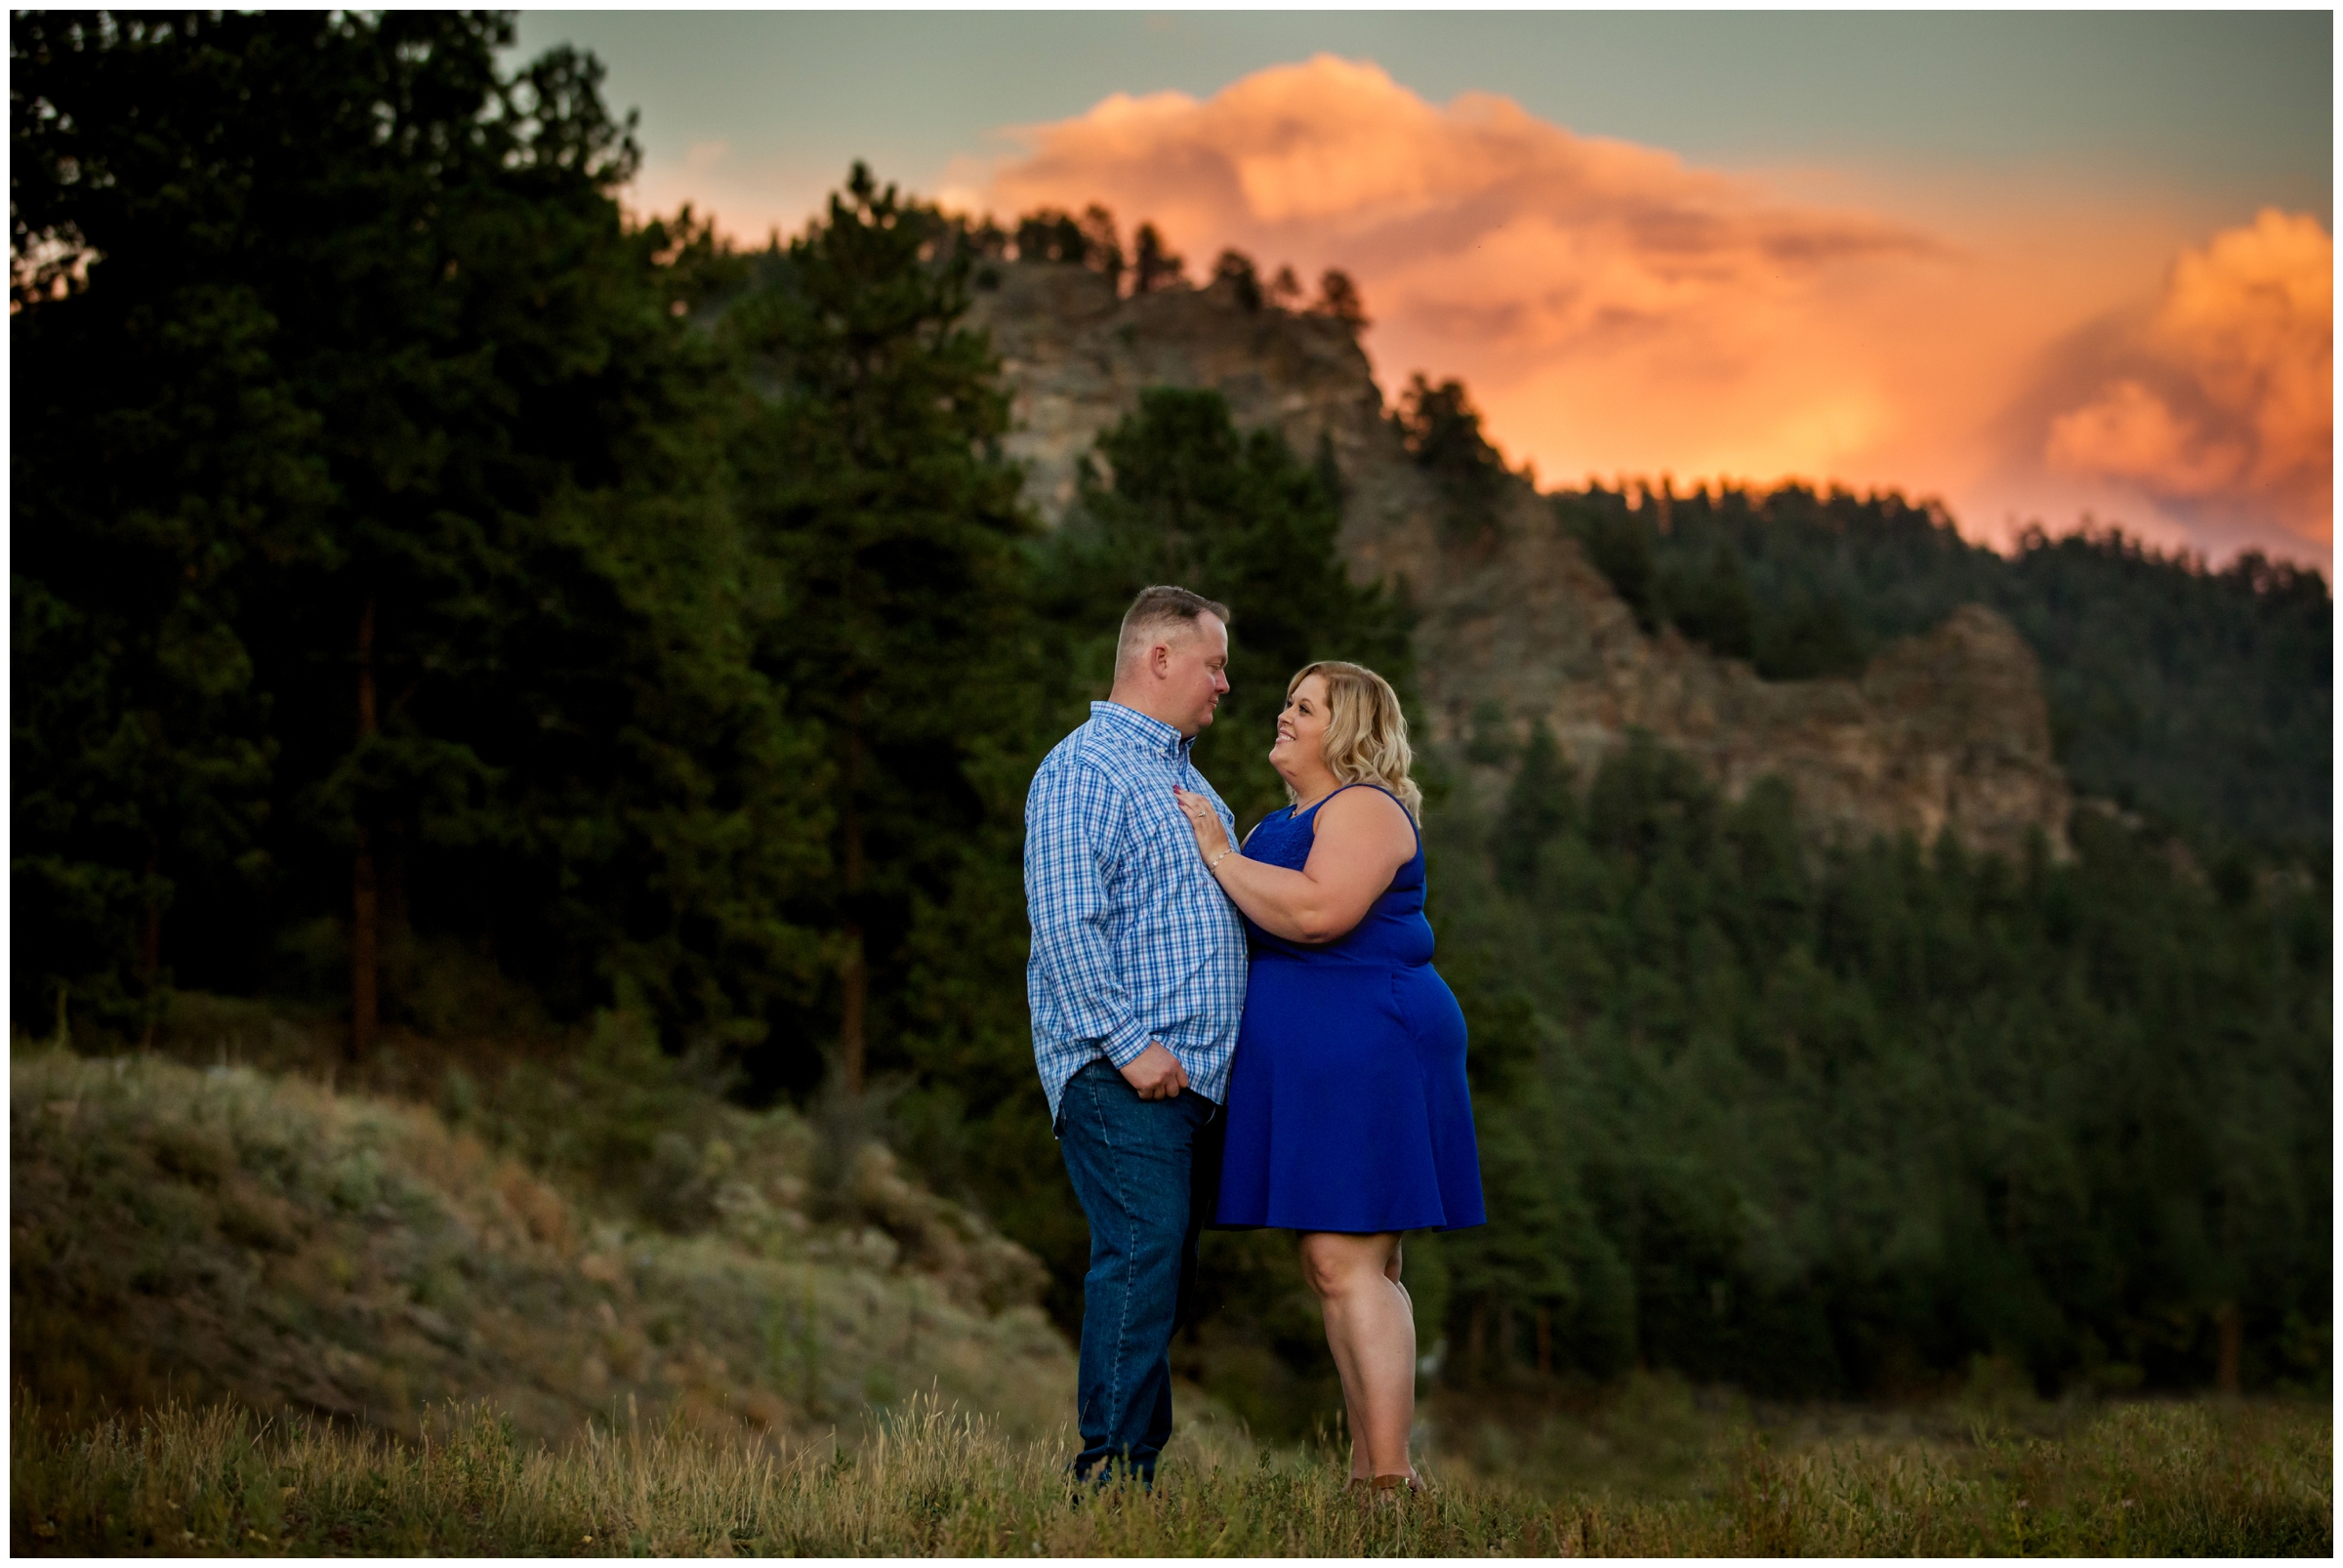 Bailey Colorado engagement pictures with mountains and colorful sunset in background